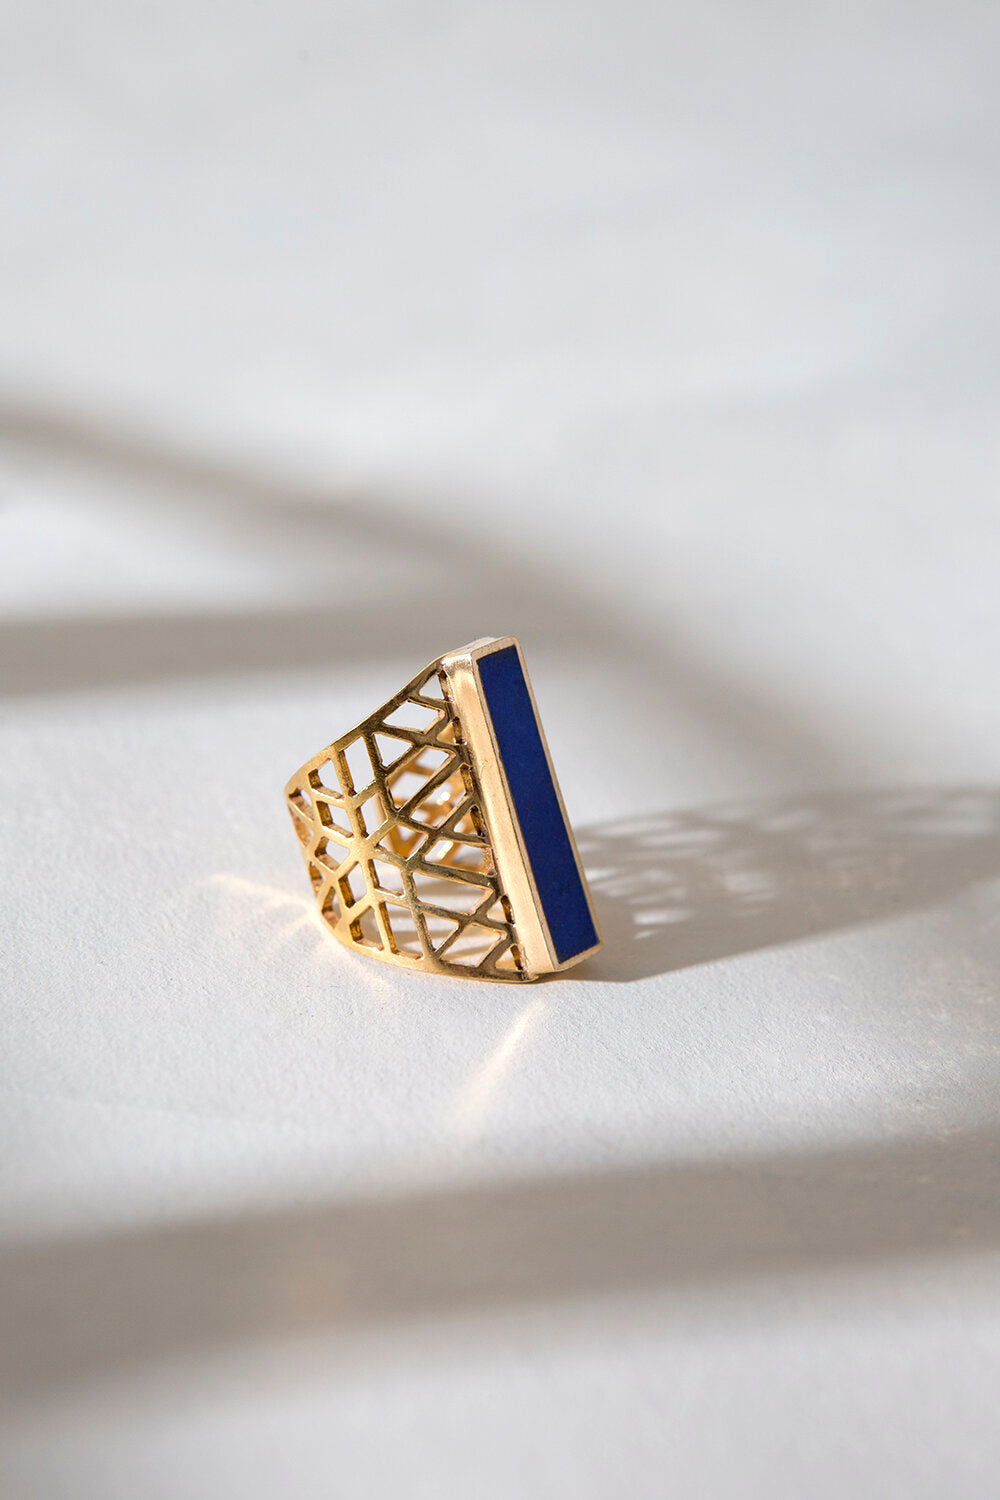 Artisan & Fox - Jewellery - JALI Gold Bar Ring in Lapis Lazuli - Handcrafted in Afghanistan